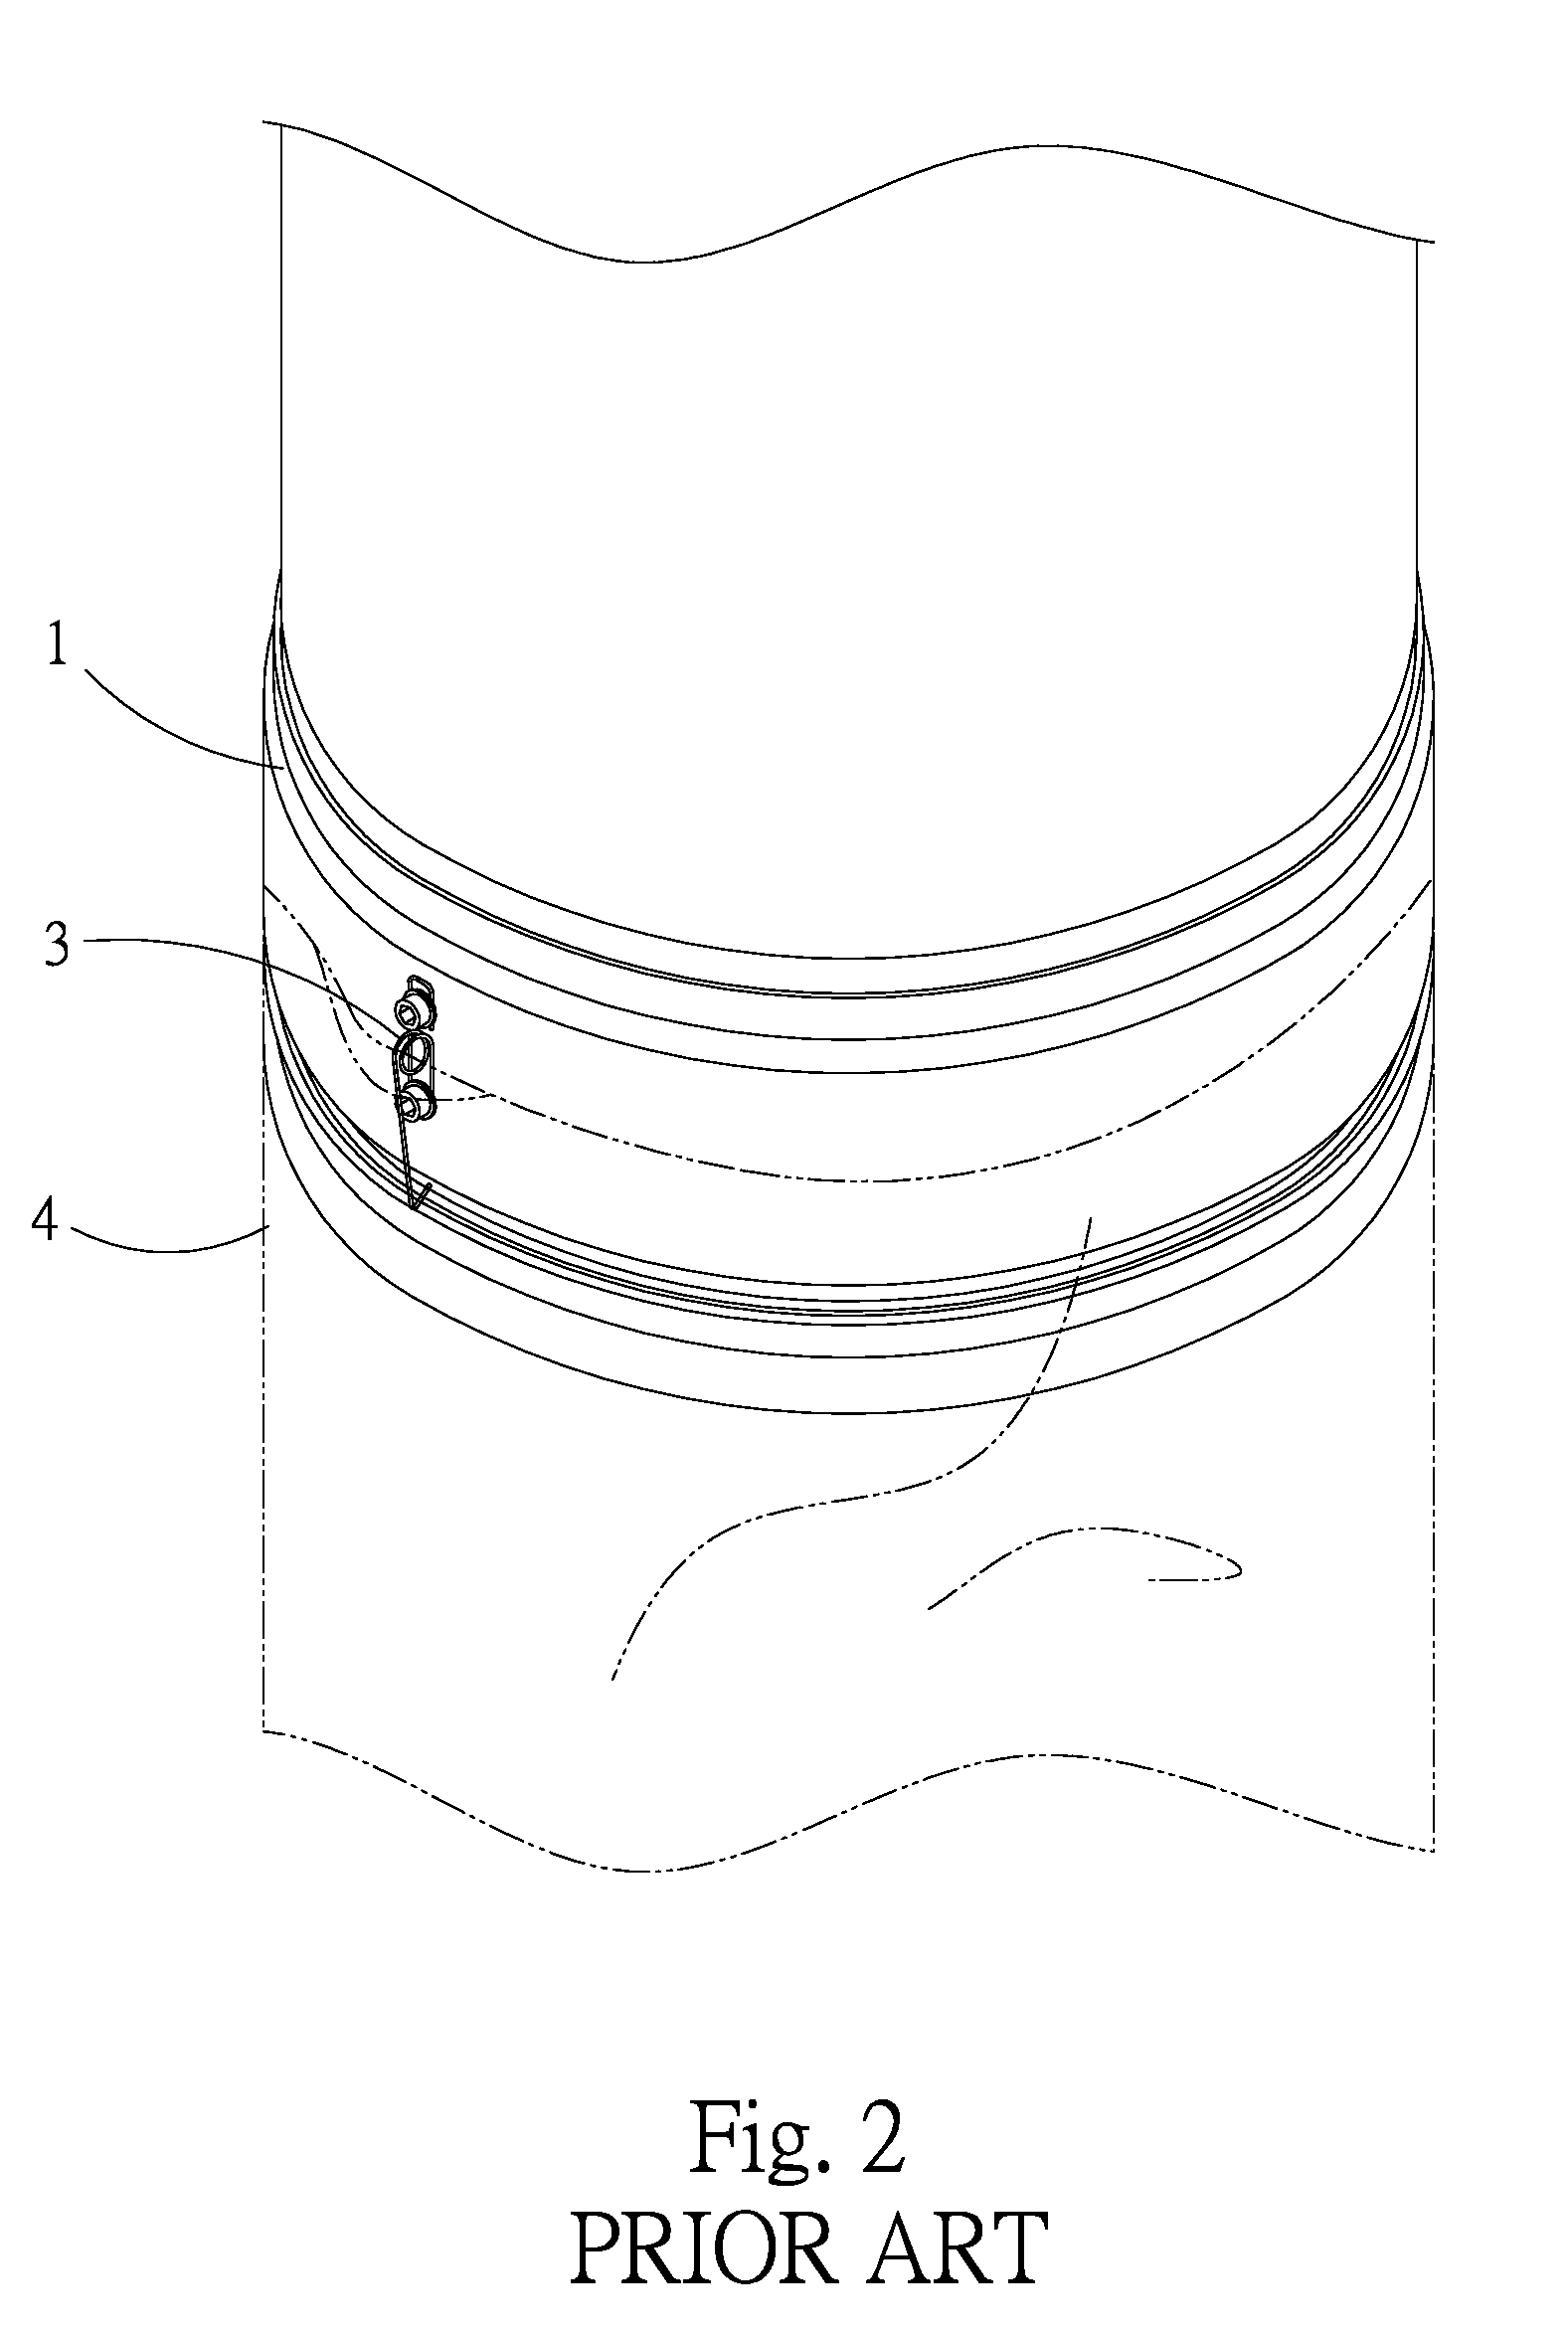 Dust bag structure easily fittable and connectable to a dust collector